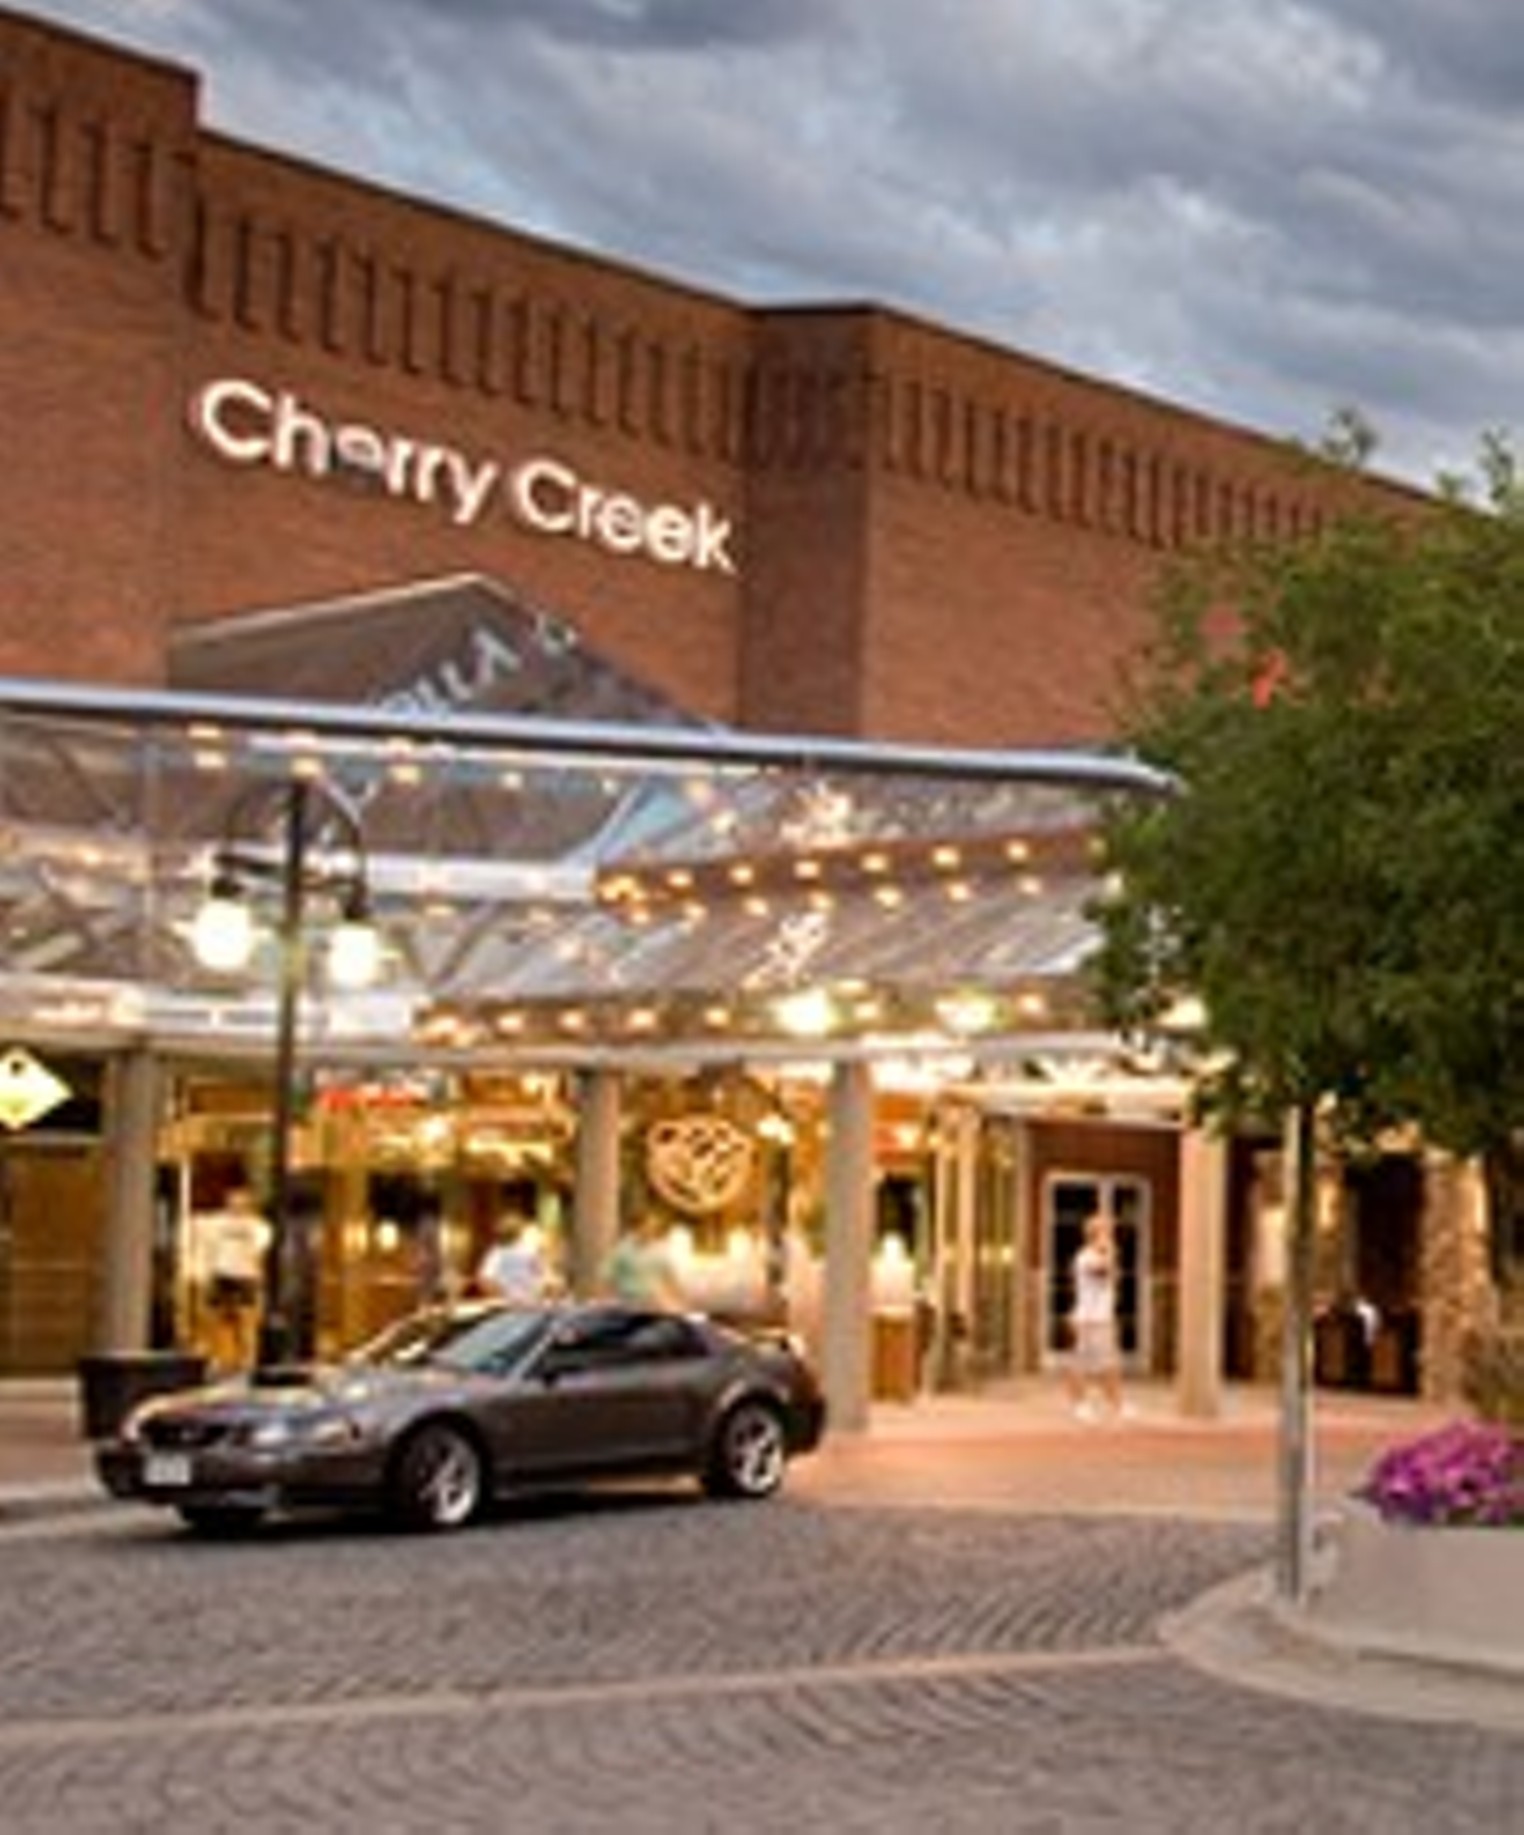 Geraud khaure was spotted shopping at Cherry creek mall in Denver Colorado.  – SPORTVISION 1